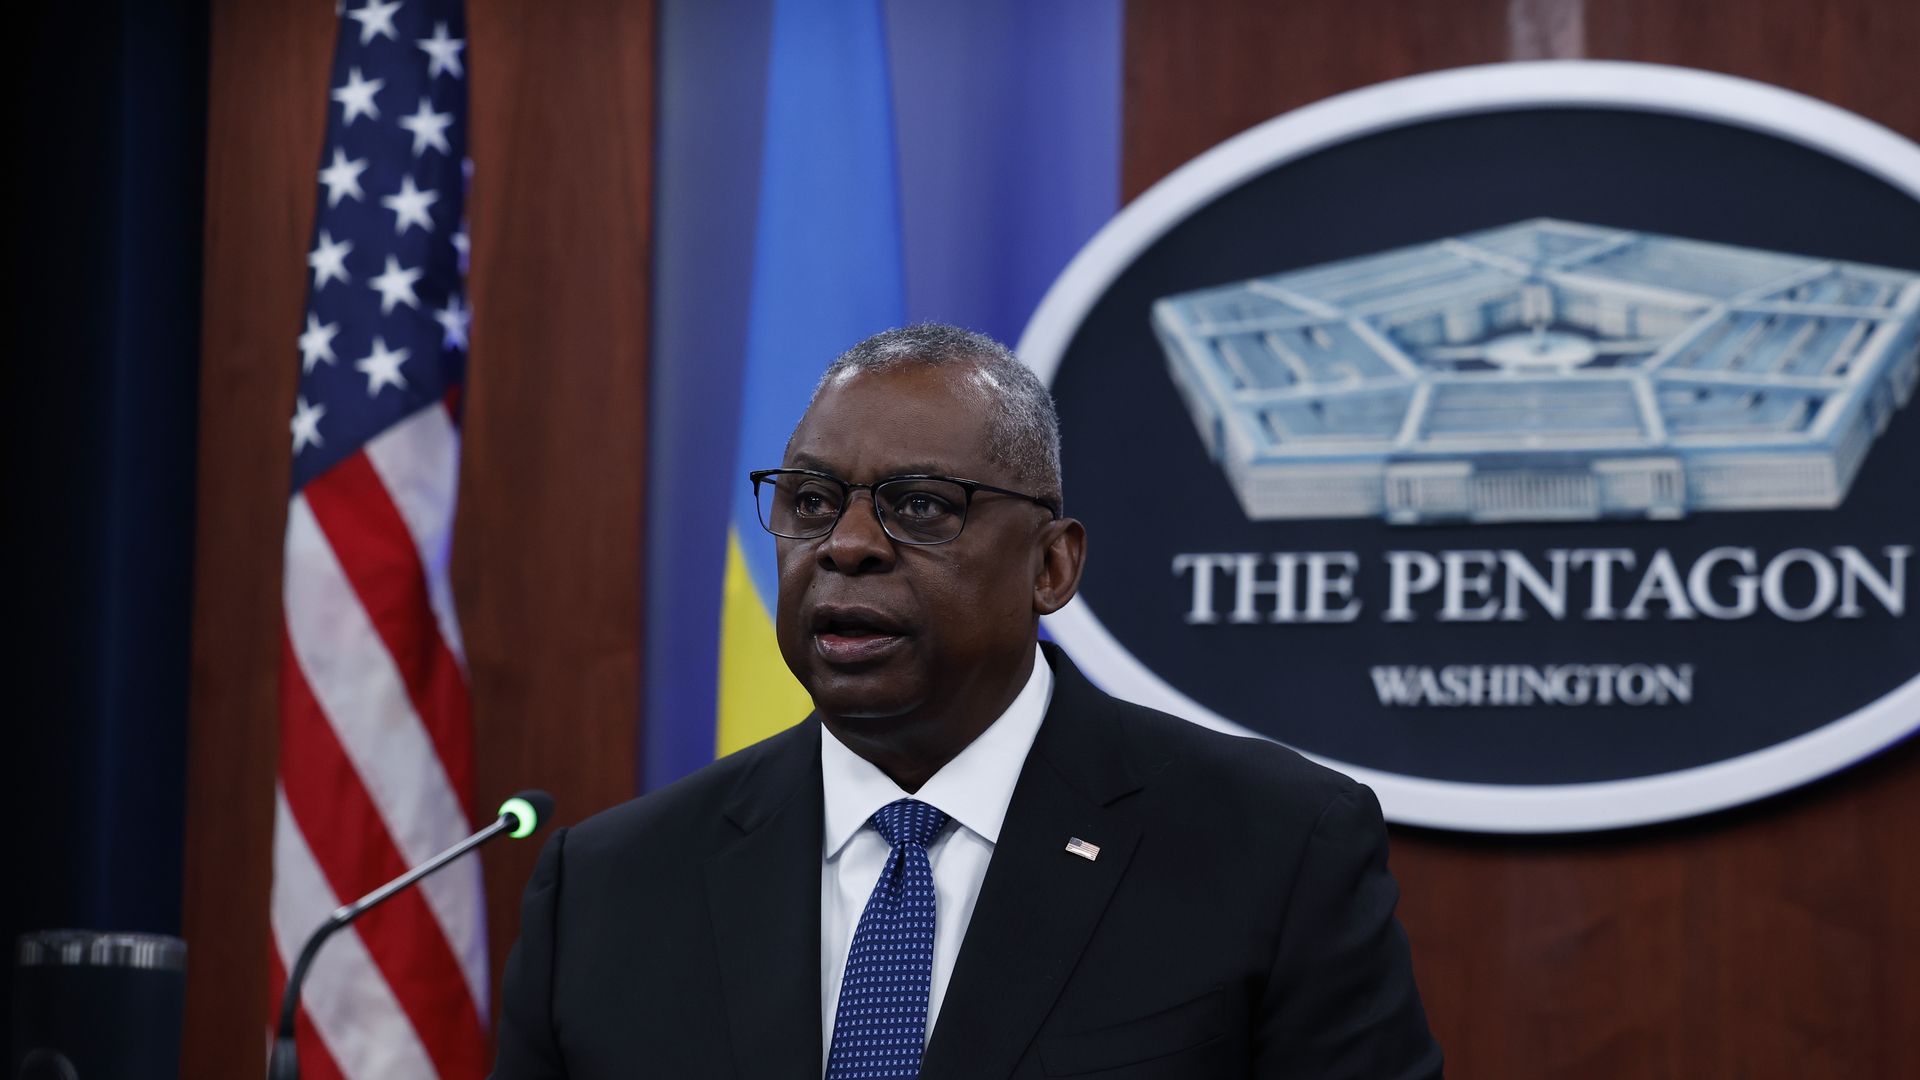 Lloyd Austin speaks into a microphone with an image of the Pentagon behind him and an American flag off to the side. 